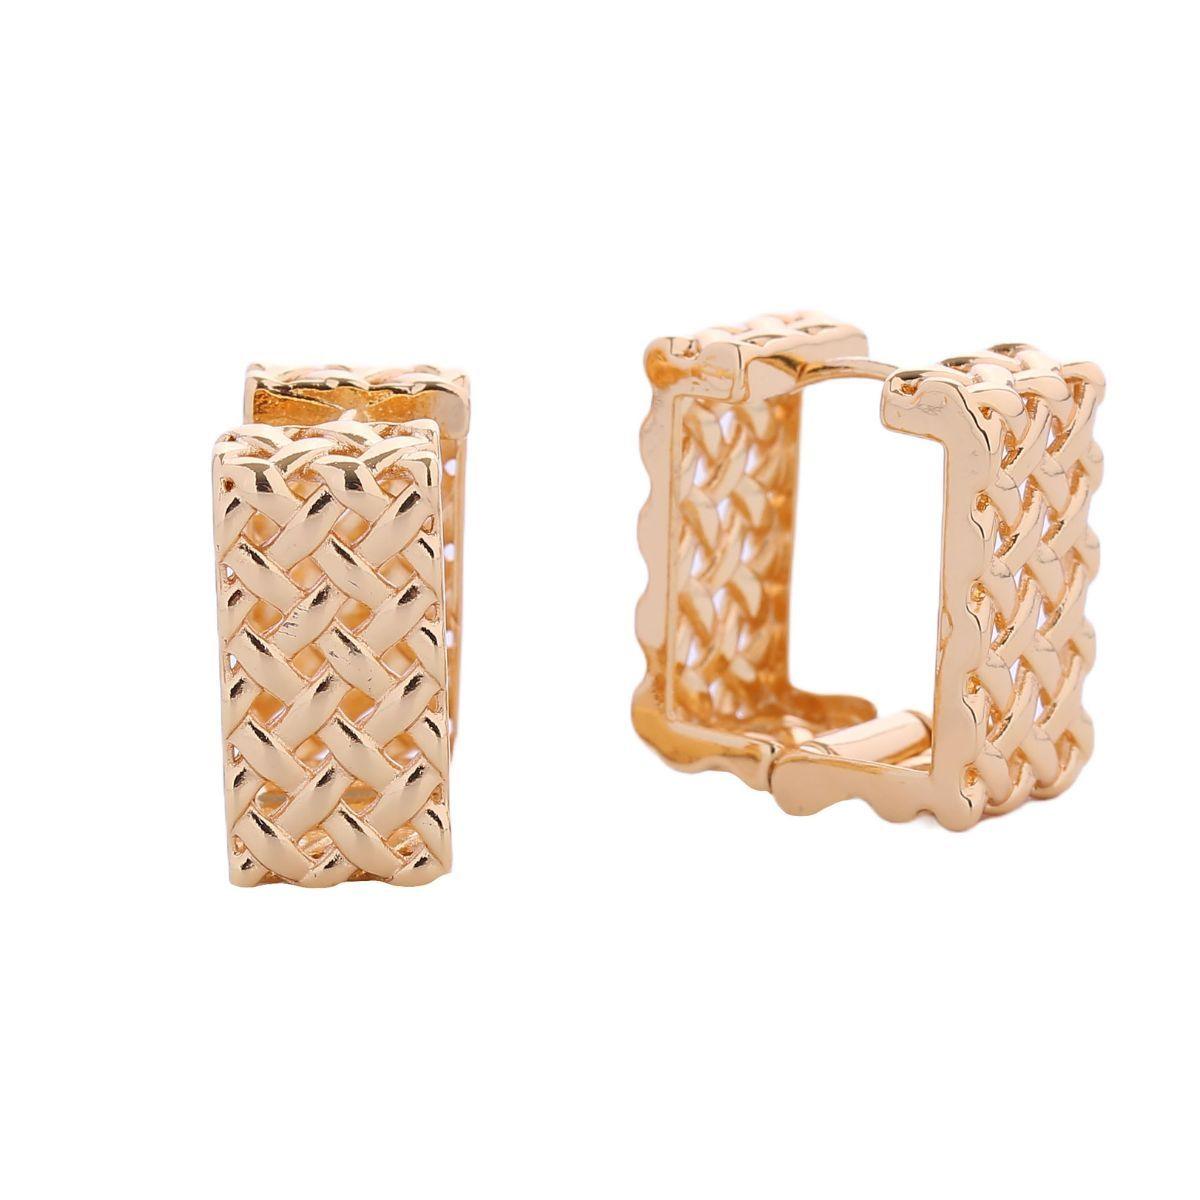 Fashion Jewelry: Gold Woven Design Earrings Make a Distinct Expression